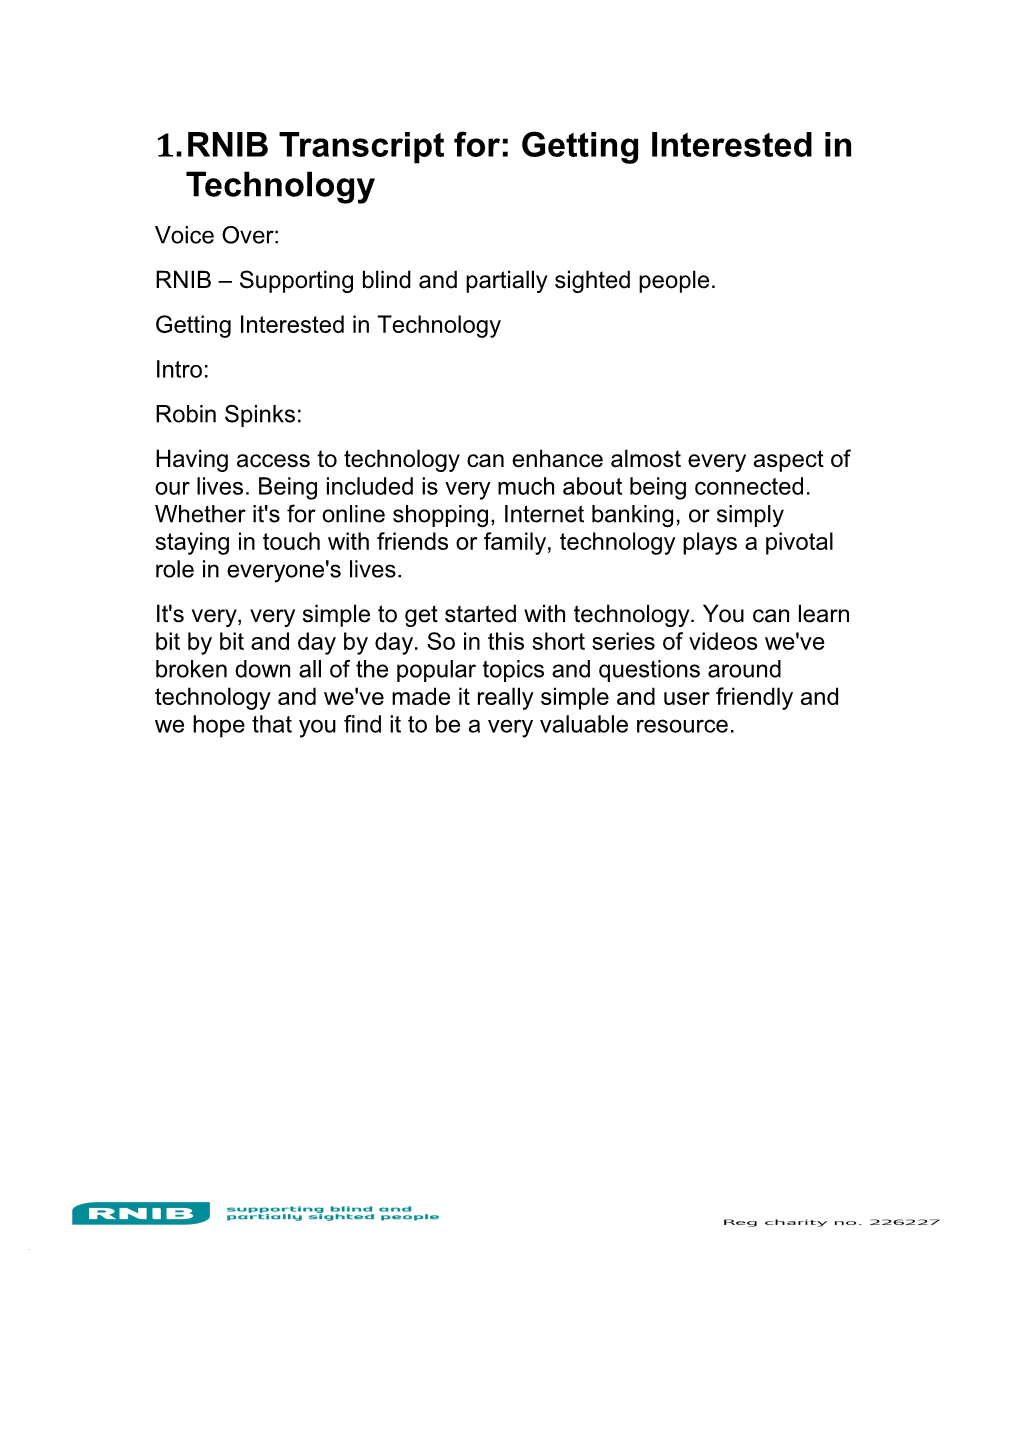 RNIB Transcript For: Getting Interested in Technology